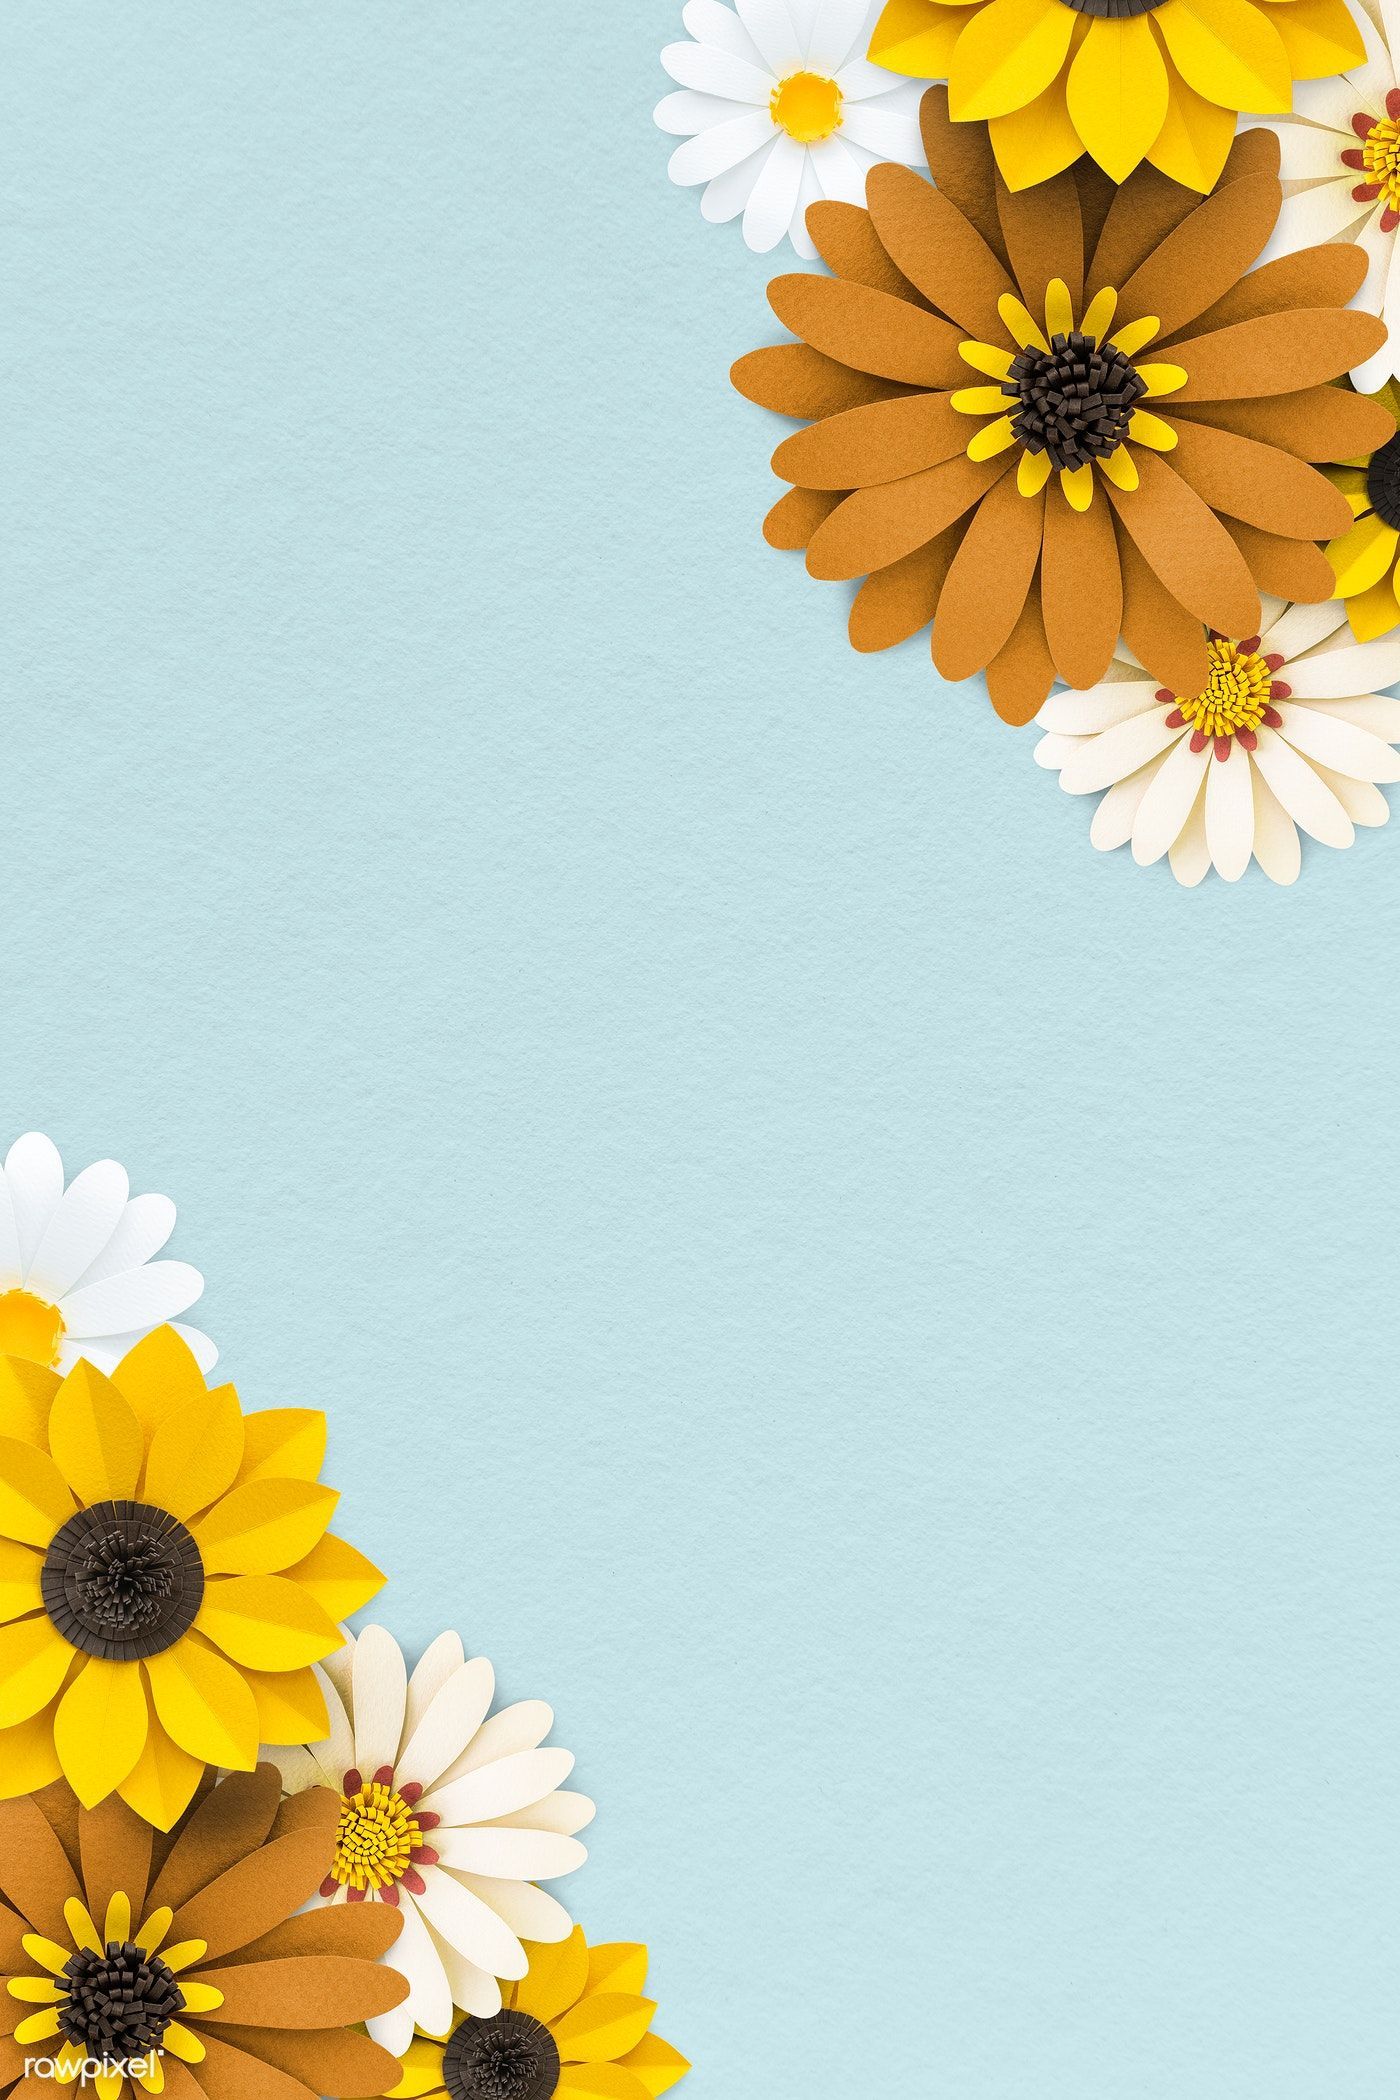 Download premium image of White and yellow paper craft daisy